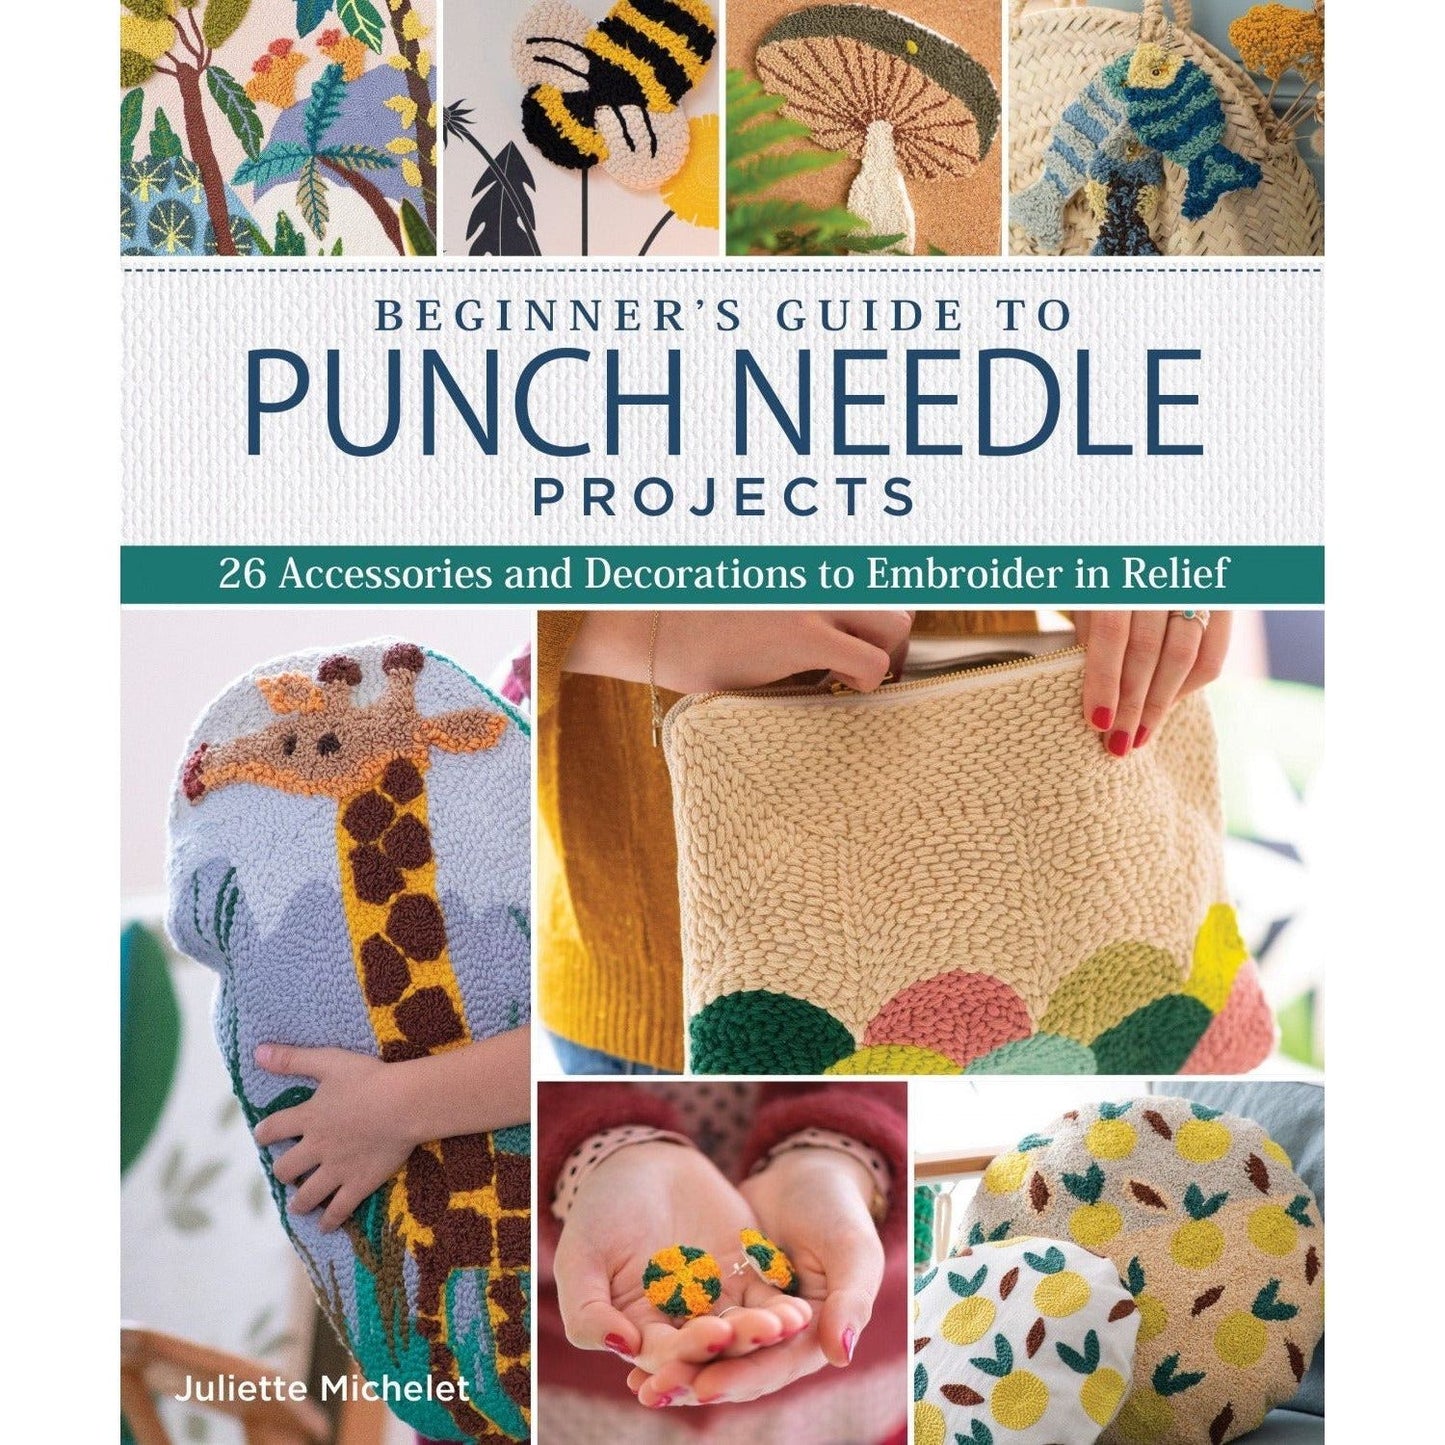 PUNCH NEEDLE FOR BEGINNERS  How to get started, tips & UK Based 